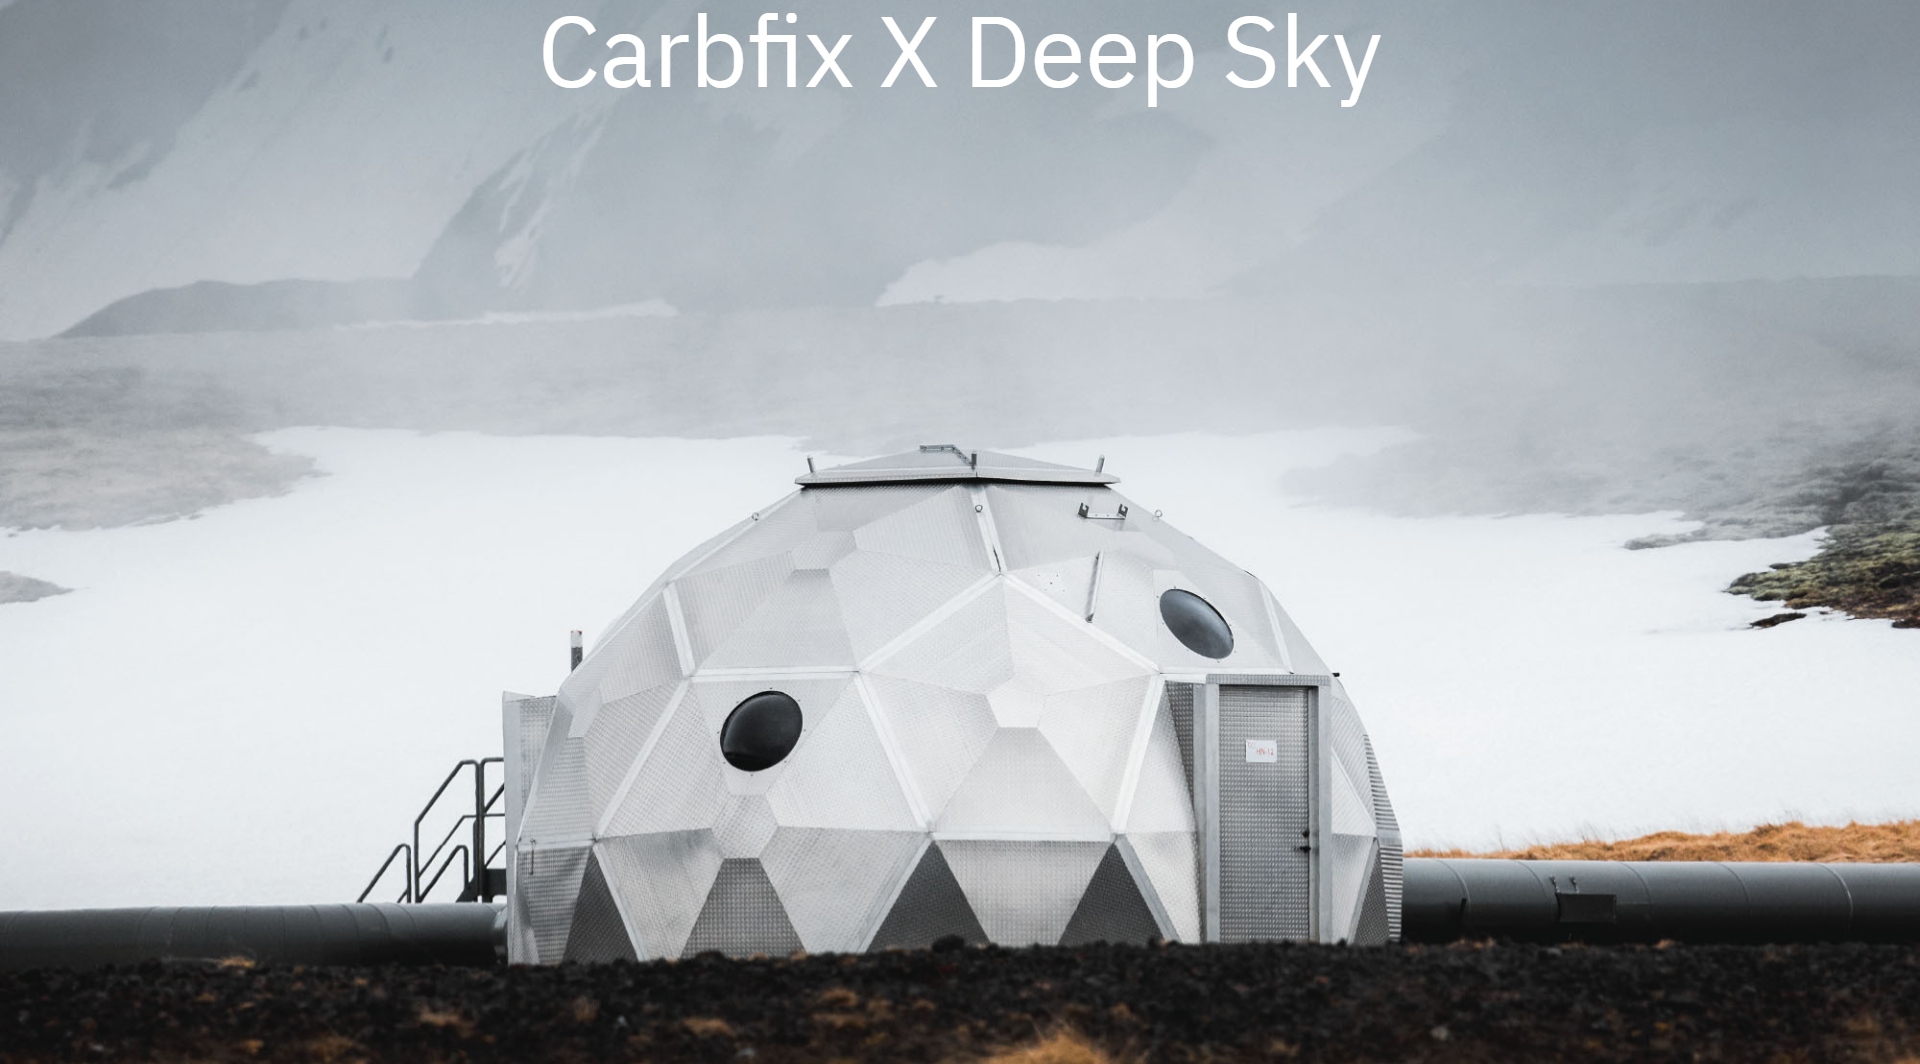 Québec's first CO2 mineralisation storage project unveiled by Deep Sky and Carbfix